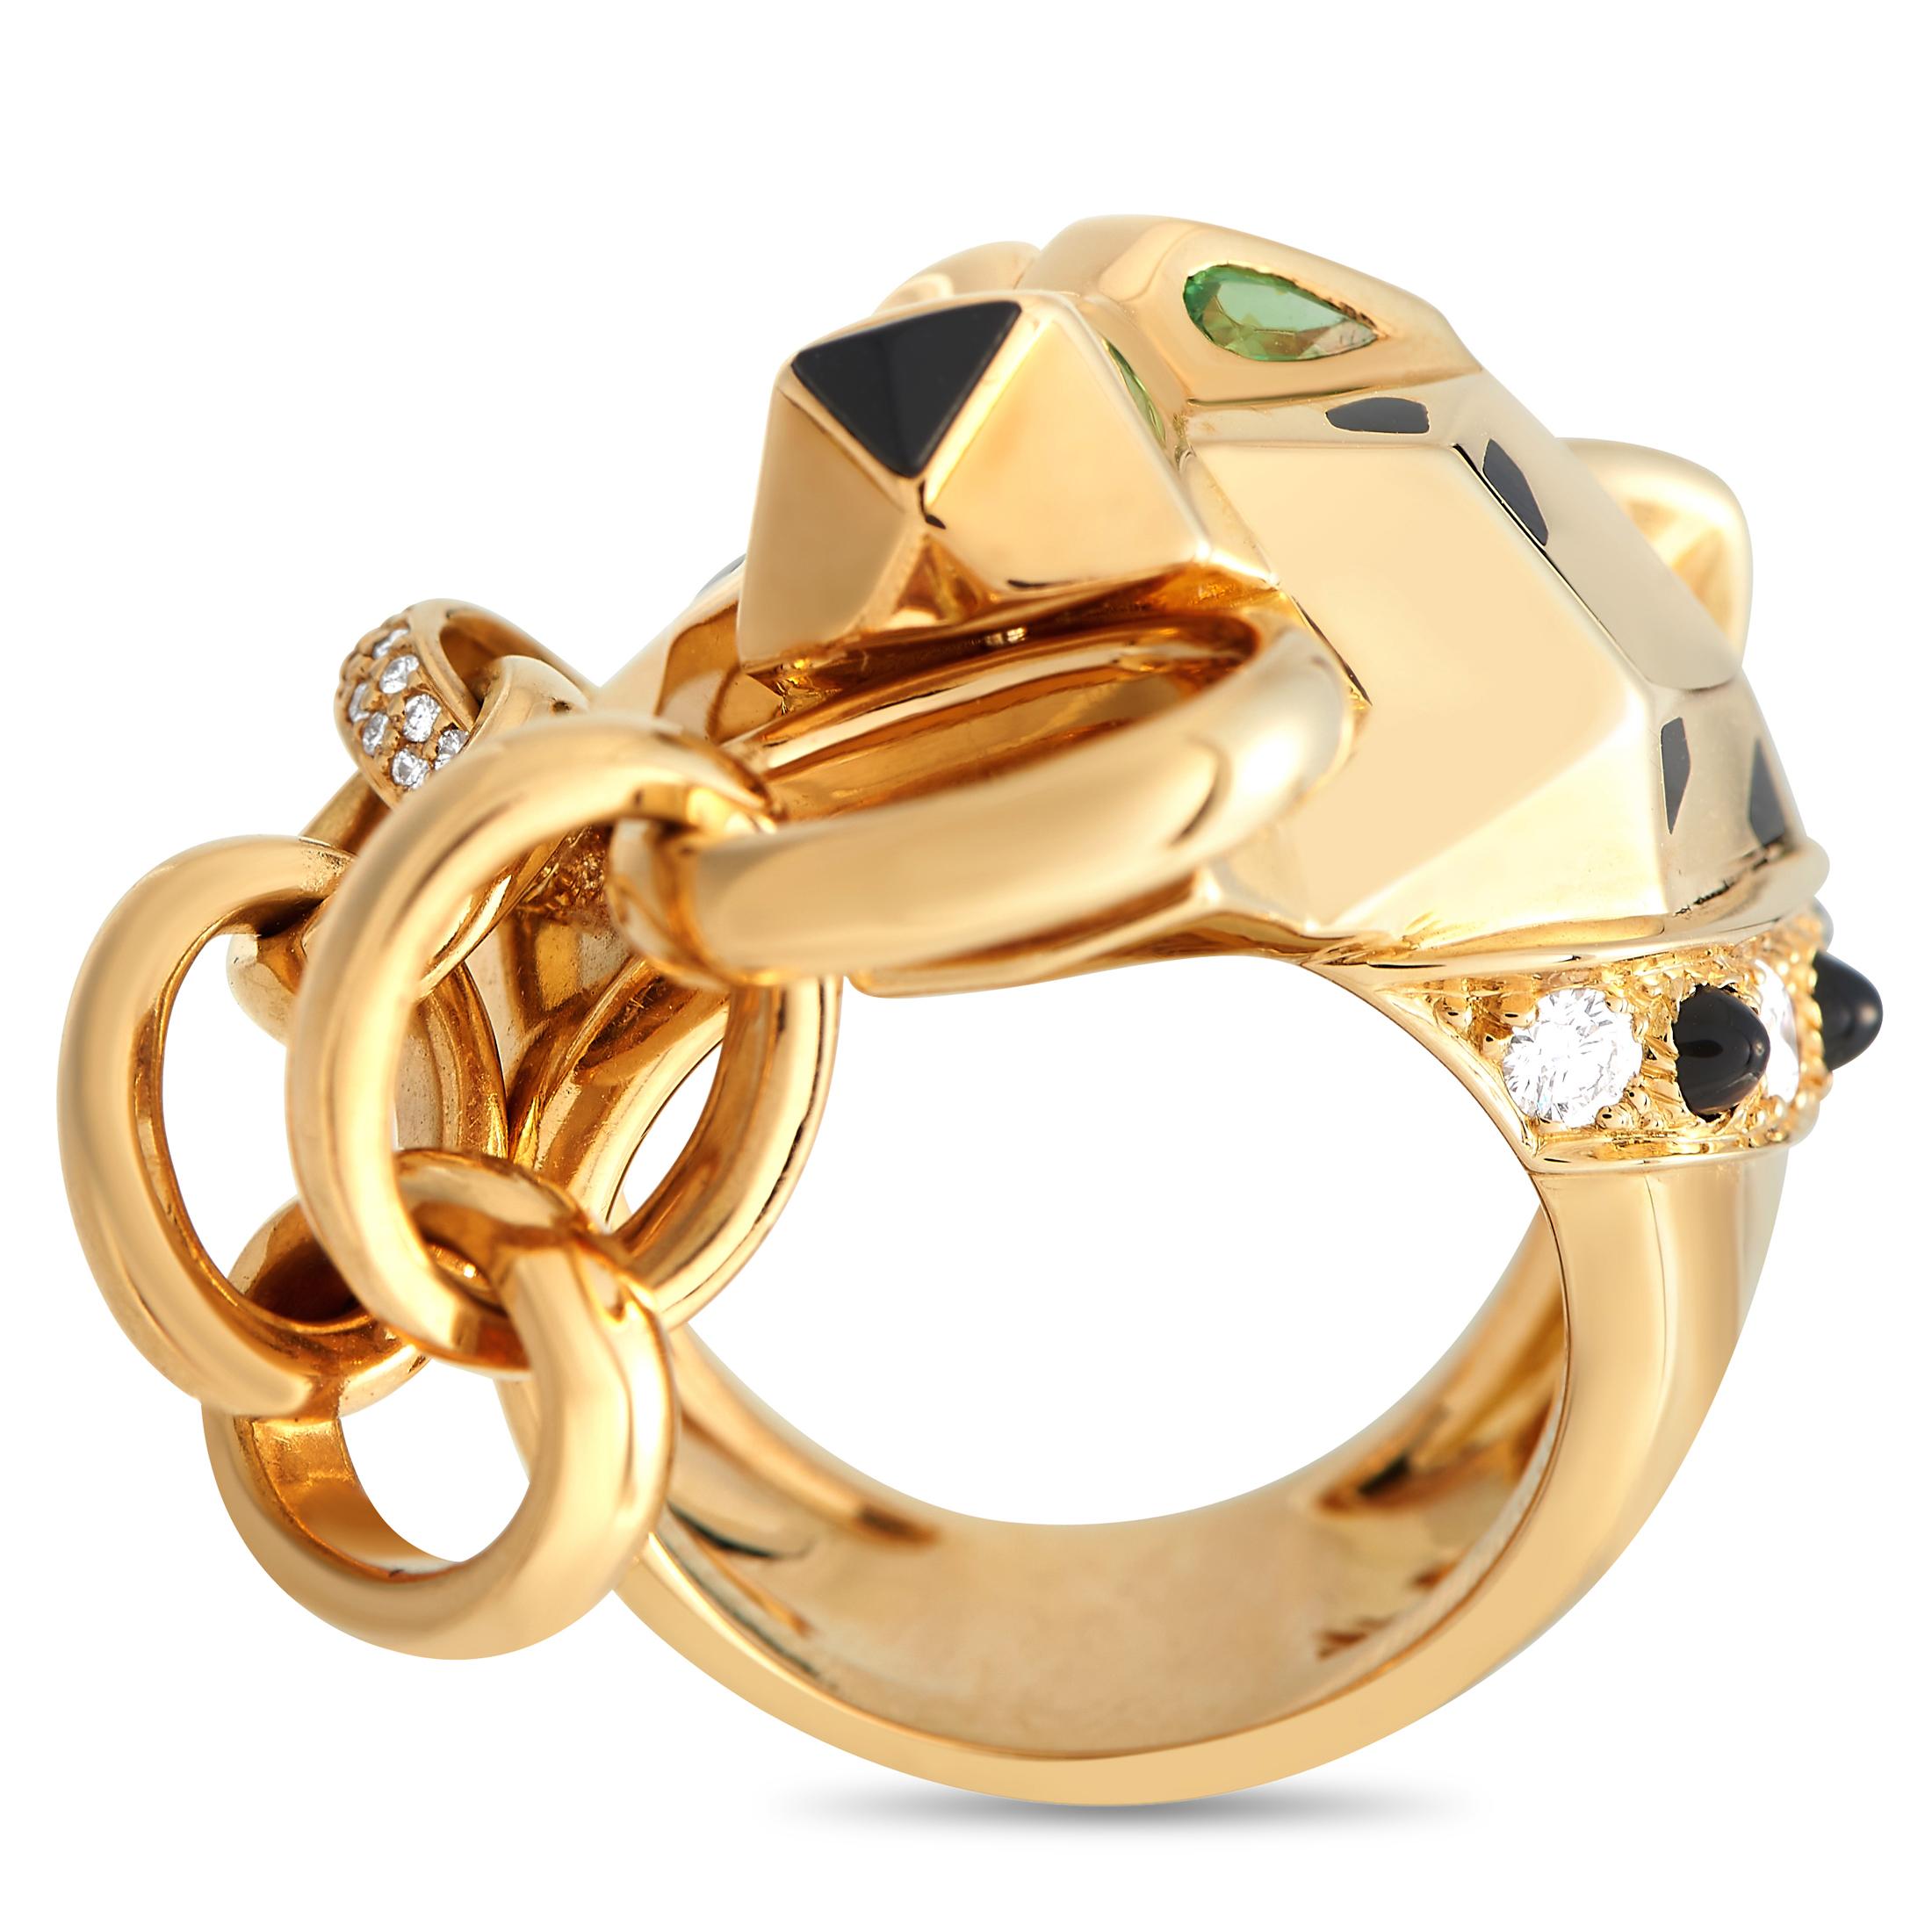 A majestic statement ring for the fierce fashionista. This meticulously crafted yellow gold ring from Cartier's luxurious Panthre de Cartier collection features a panther's head incorporated into the band. The geometric panther's head has green